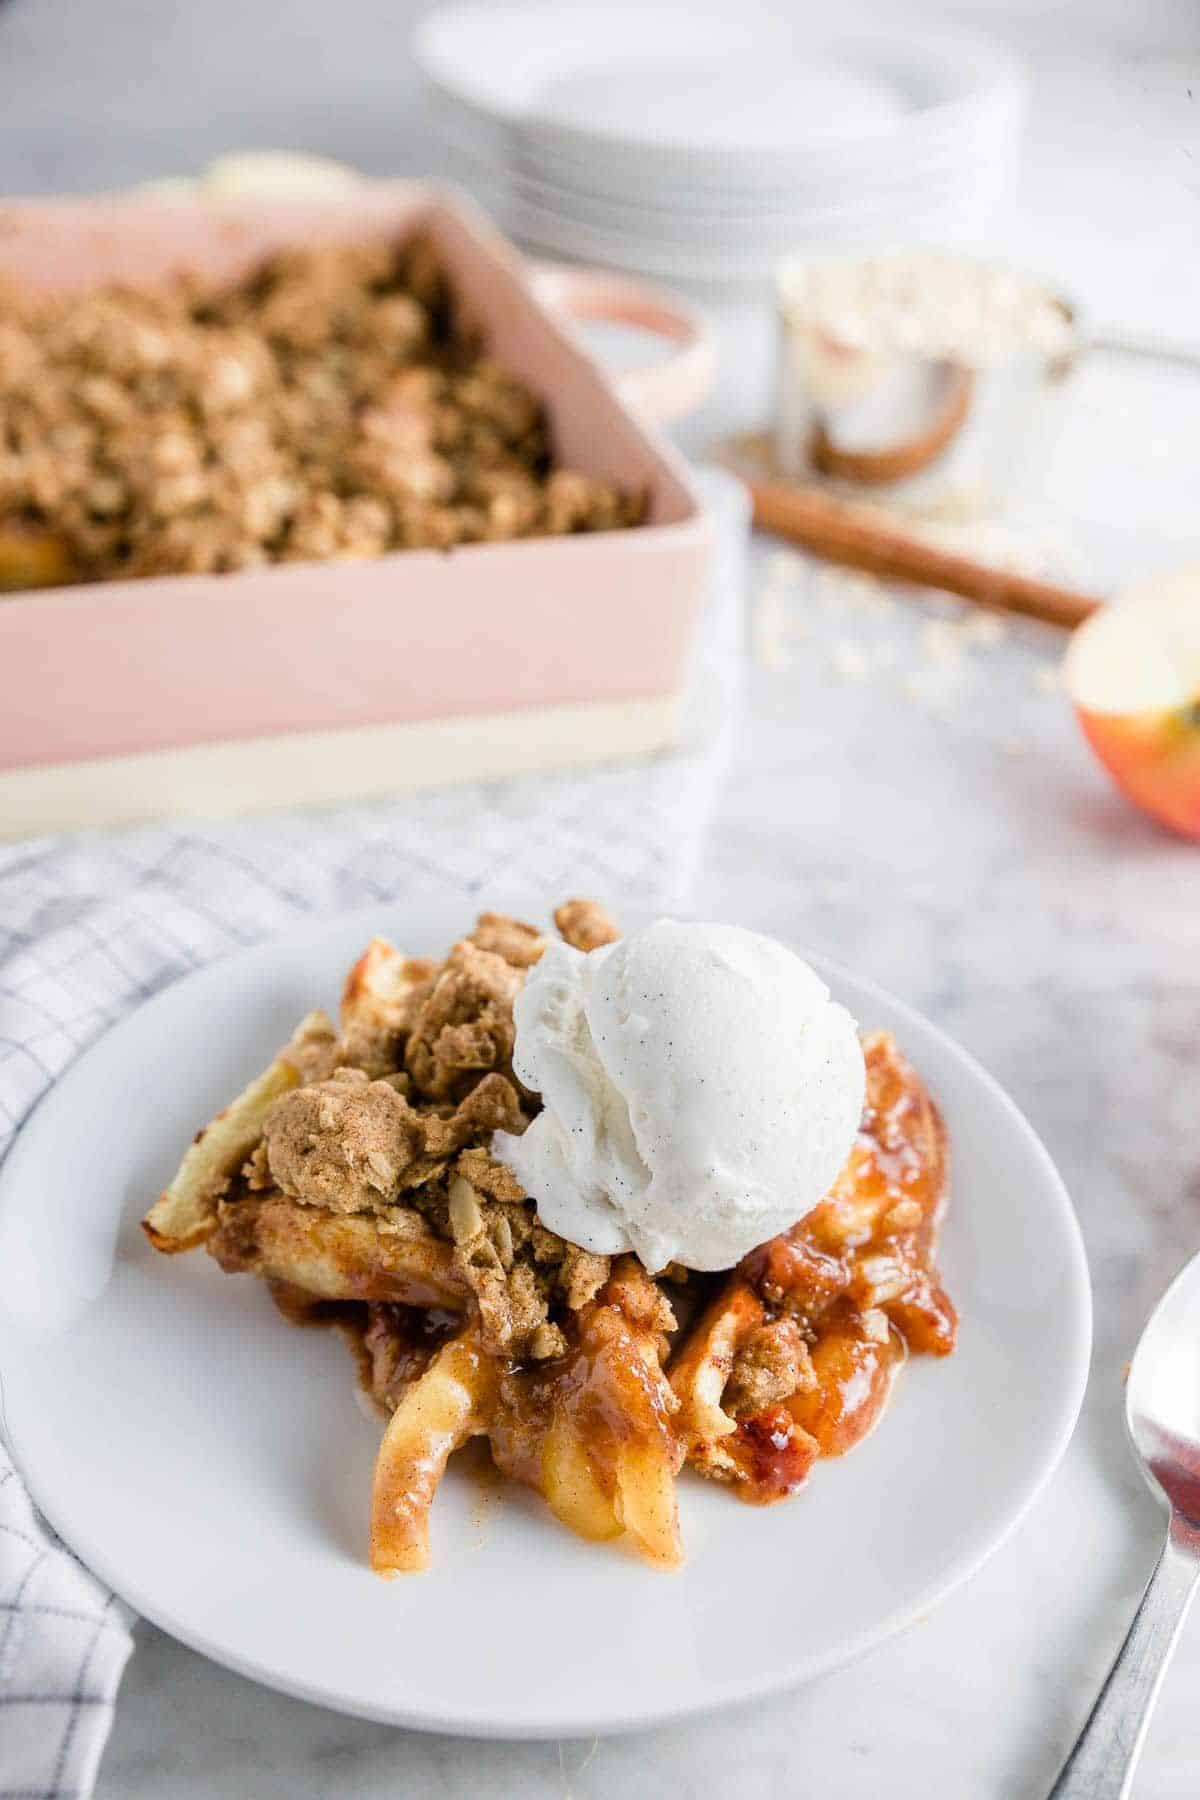 A piece of Apple Crisp, Gluten-Free, Dairy-Free on a white plate.